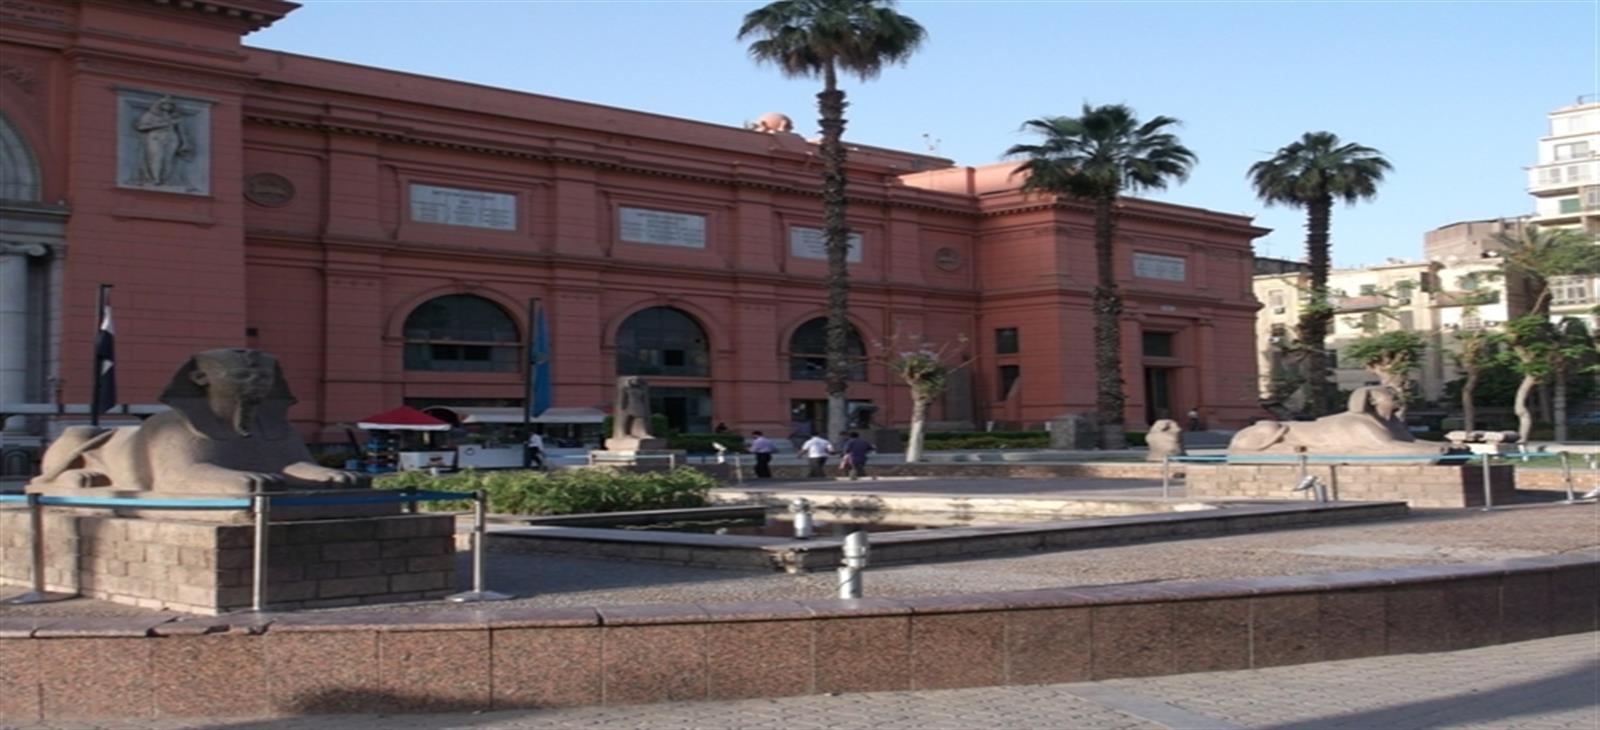 Egyptian Museum at Cairo